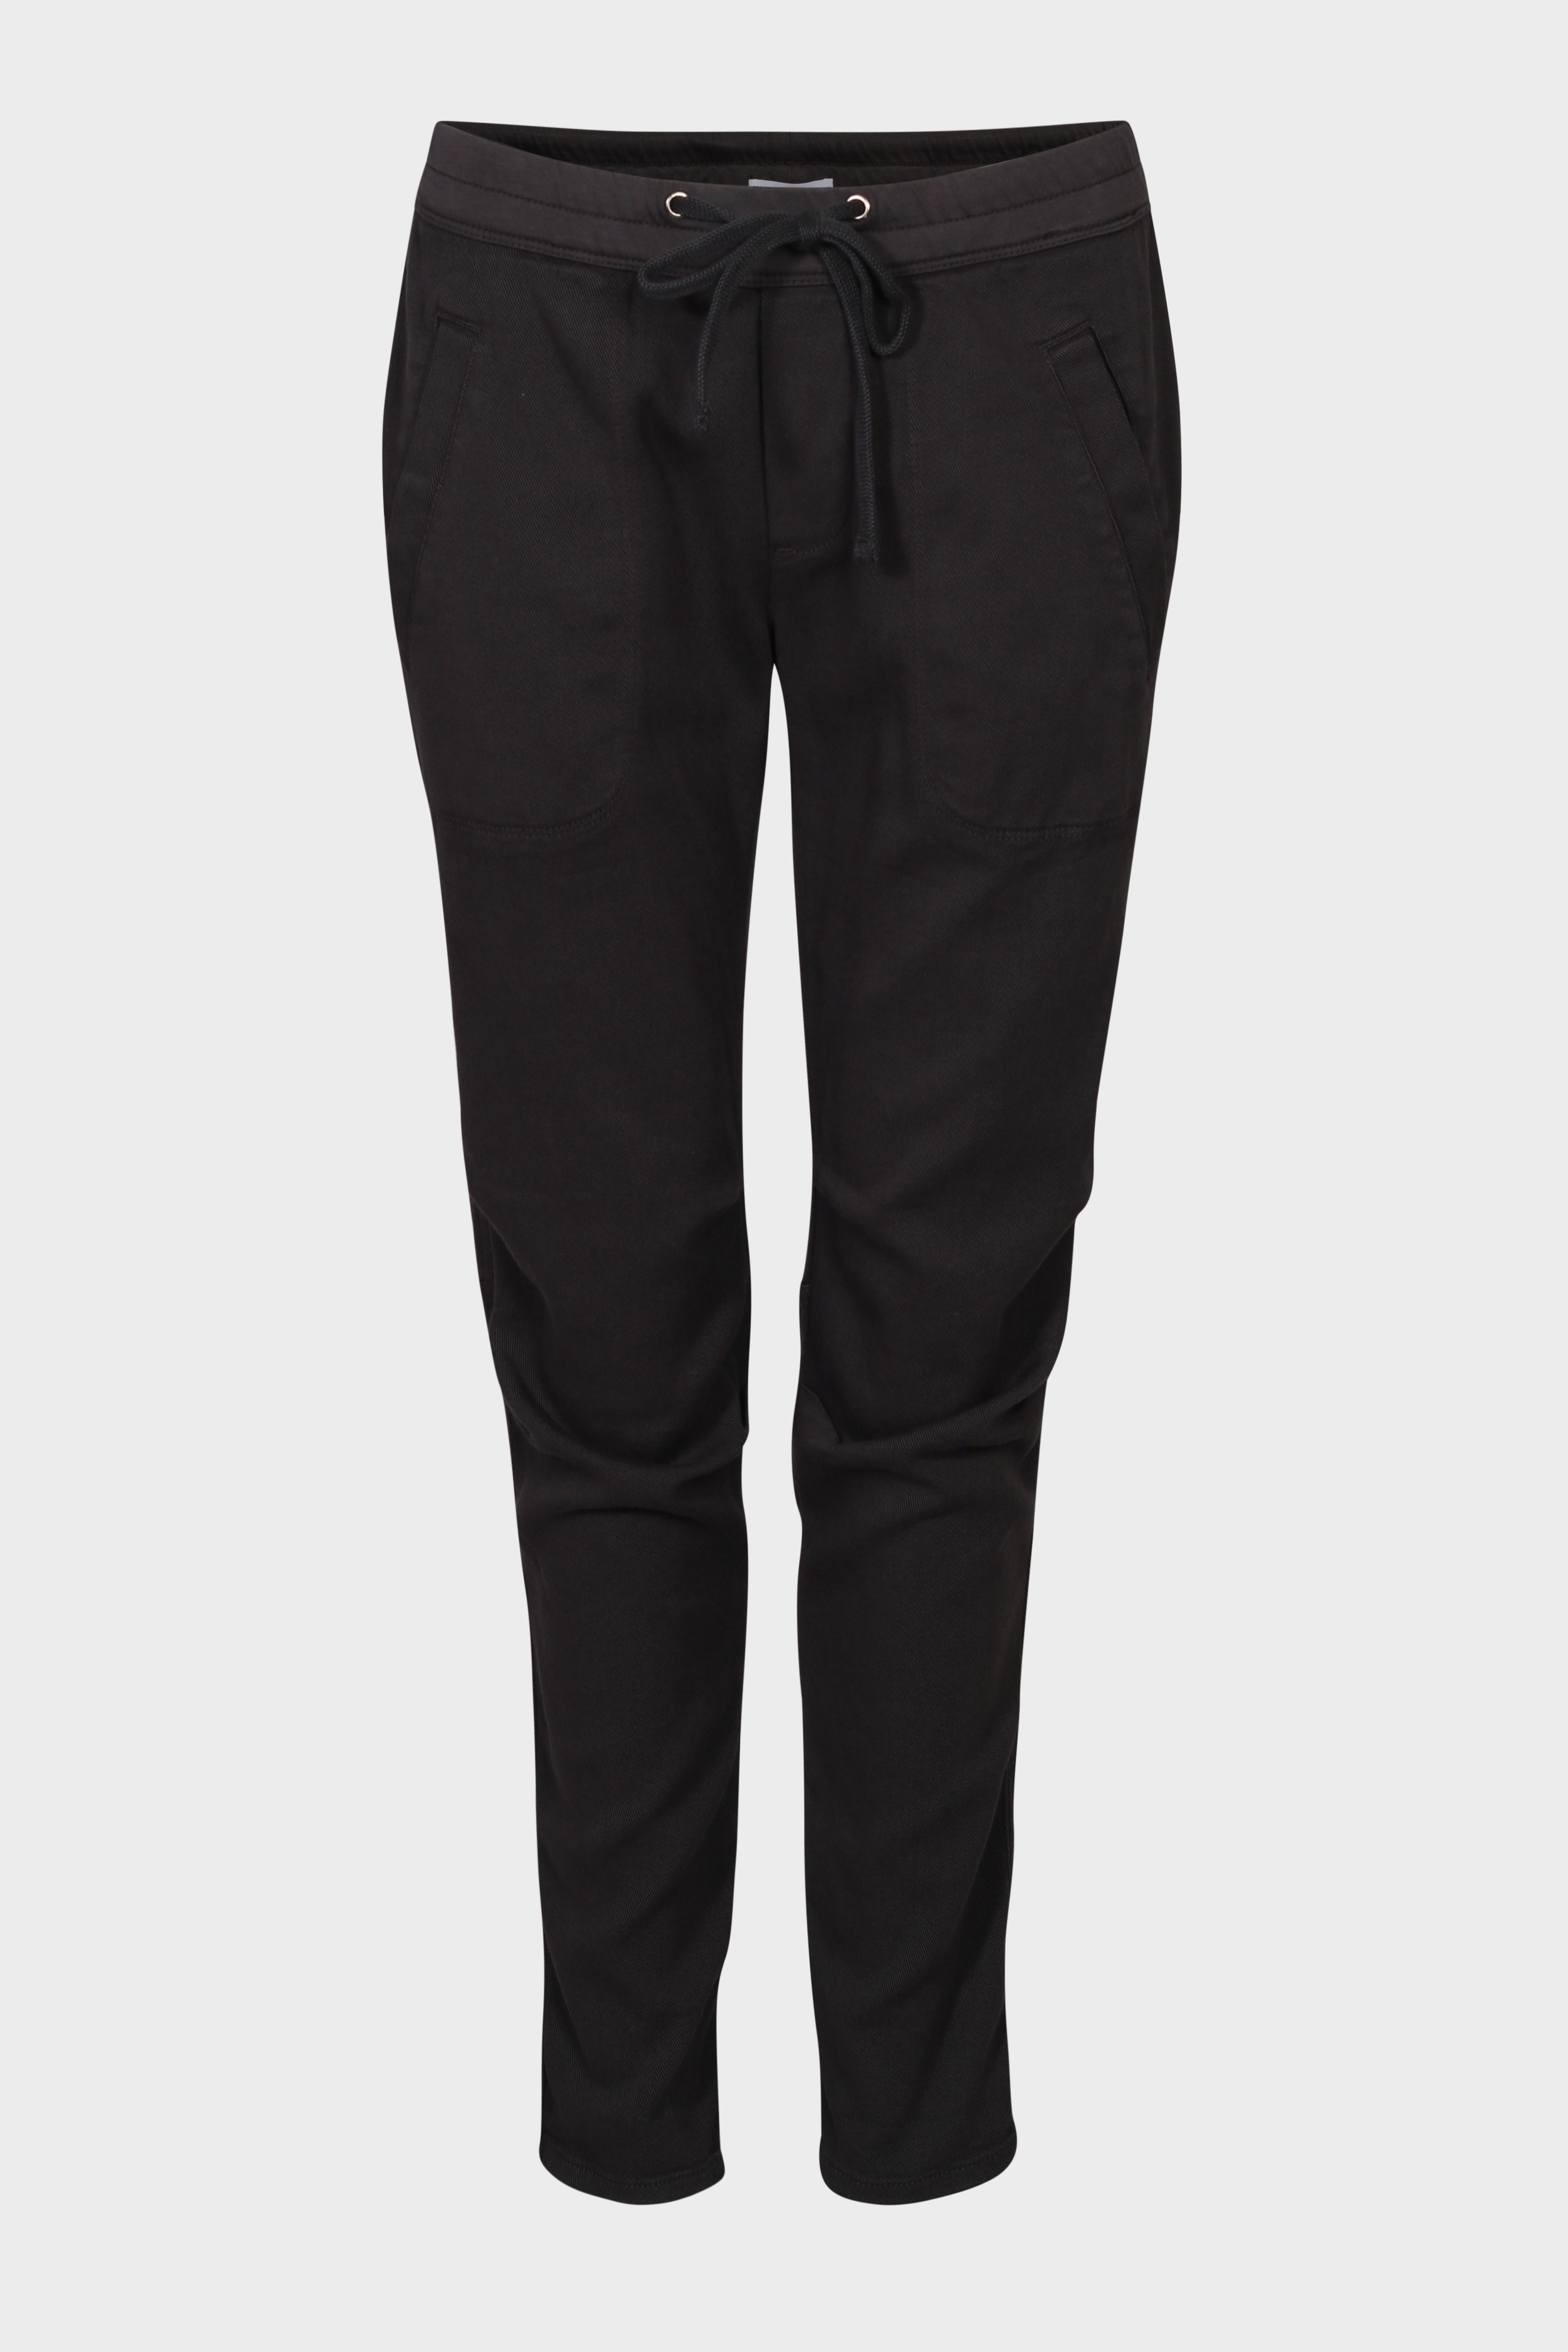 JAMES PERSE Soft Drape Utility Pant in Washed Carbon